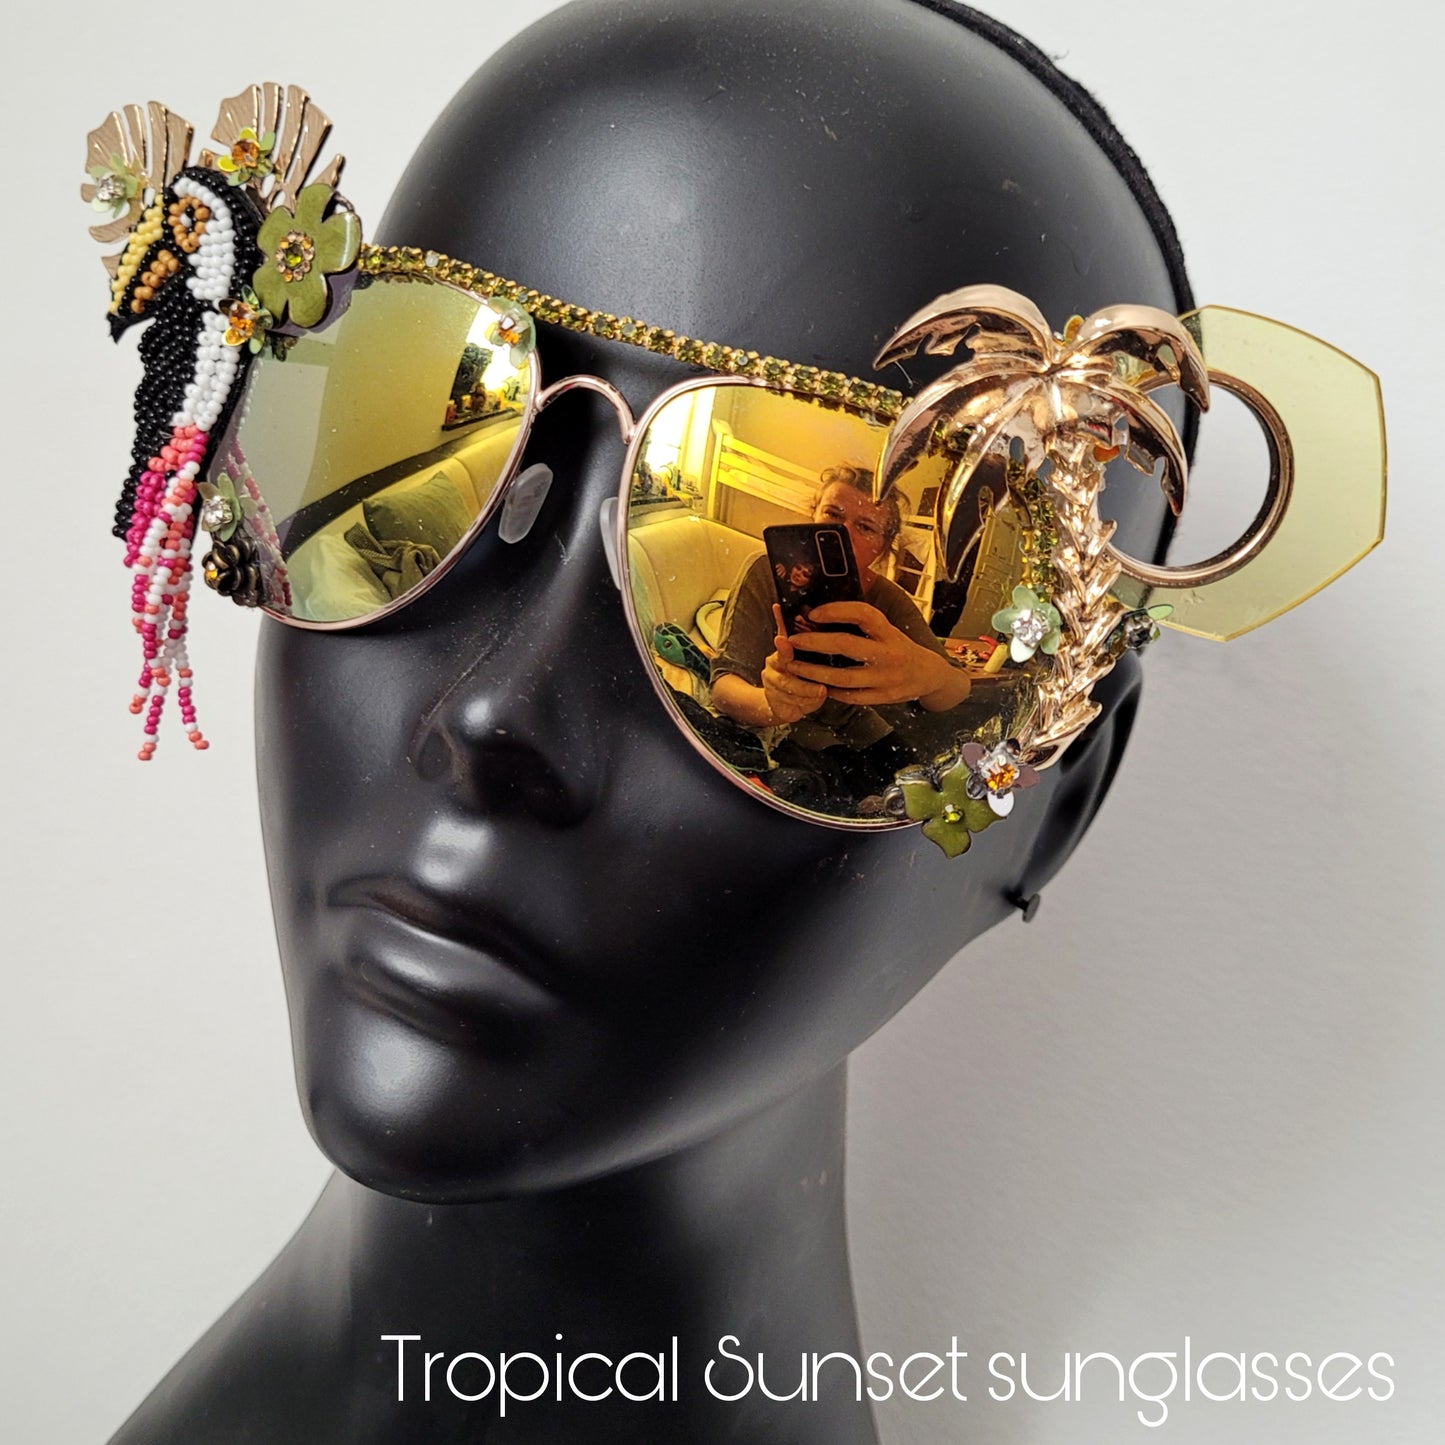 Paradise Lost collection: the Tropical Sunset showpiece sunglasses